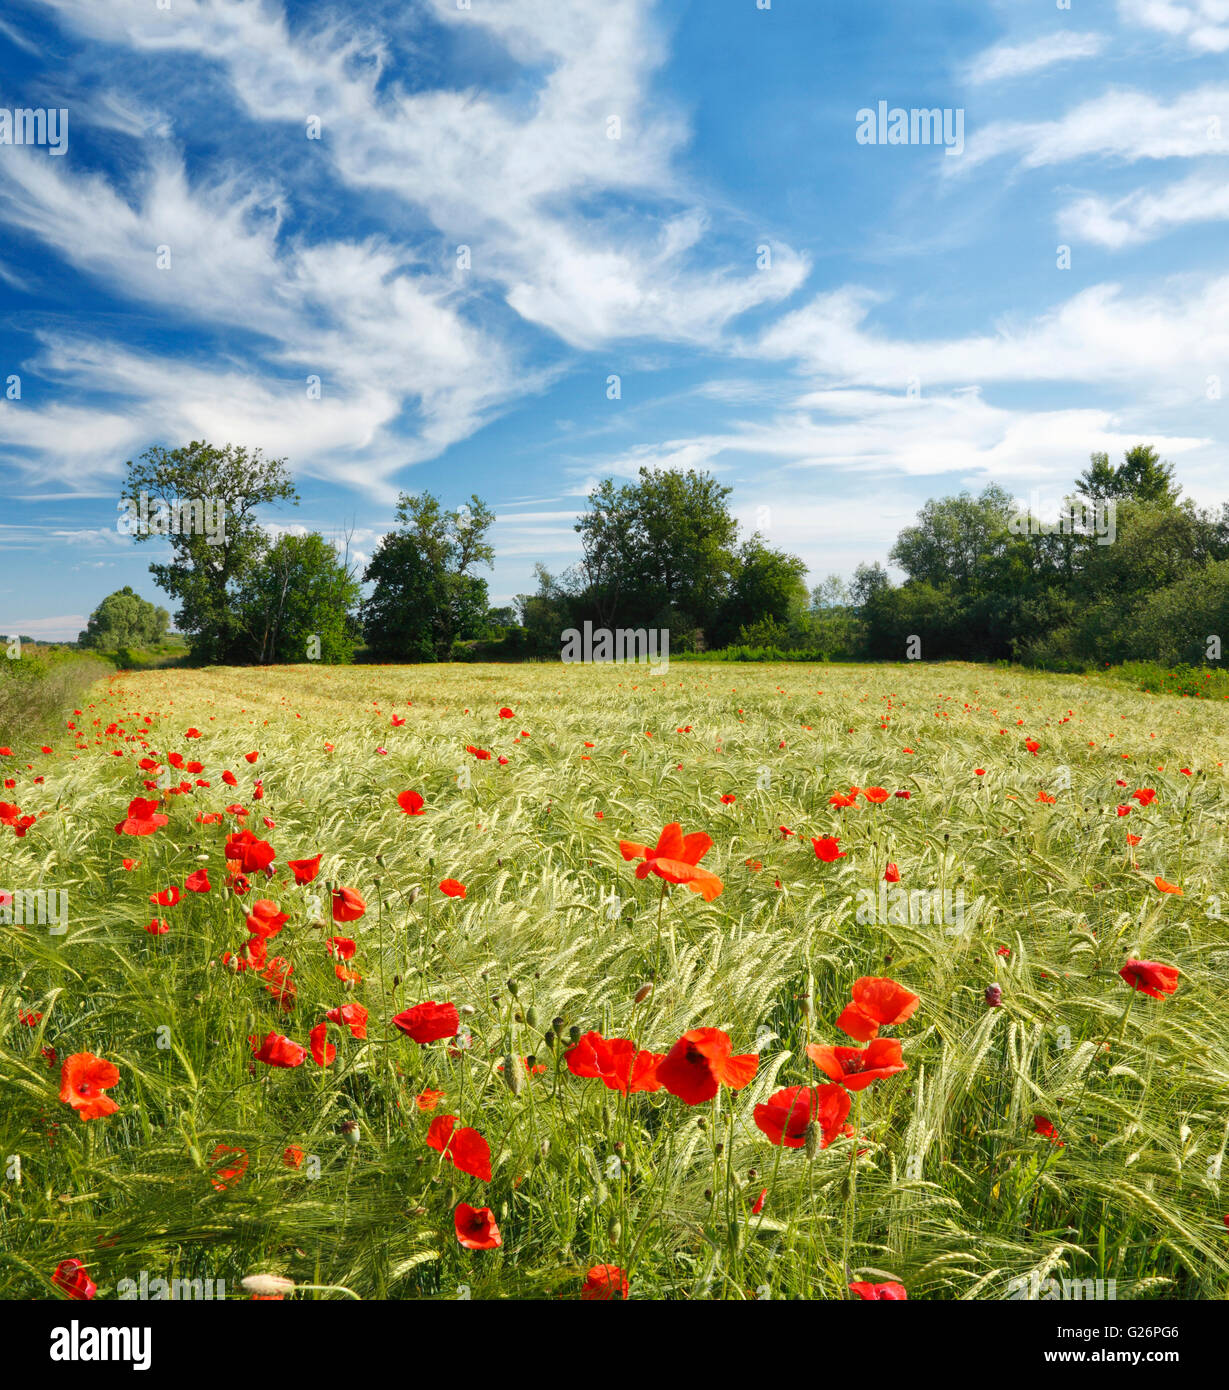 Red poppy flowers in a wheat field with beautiful clouds in the sky Stock Photo